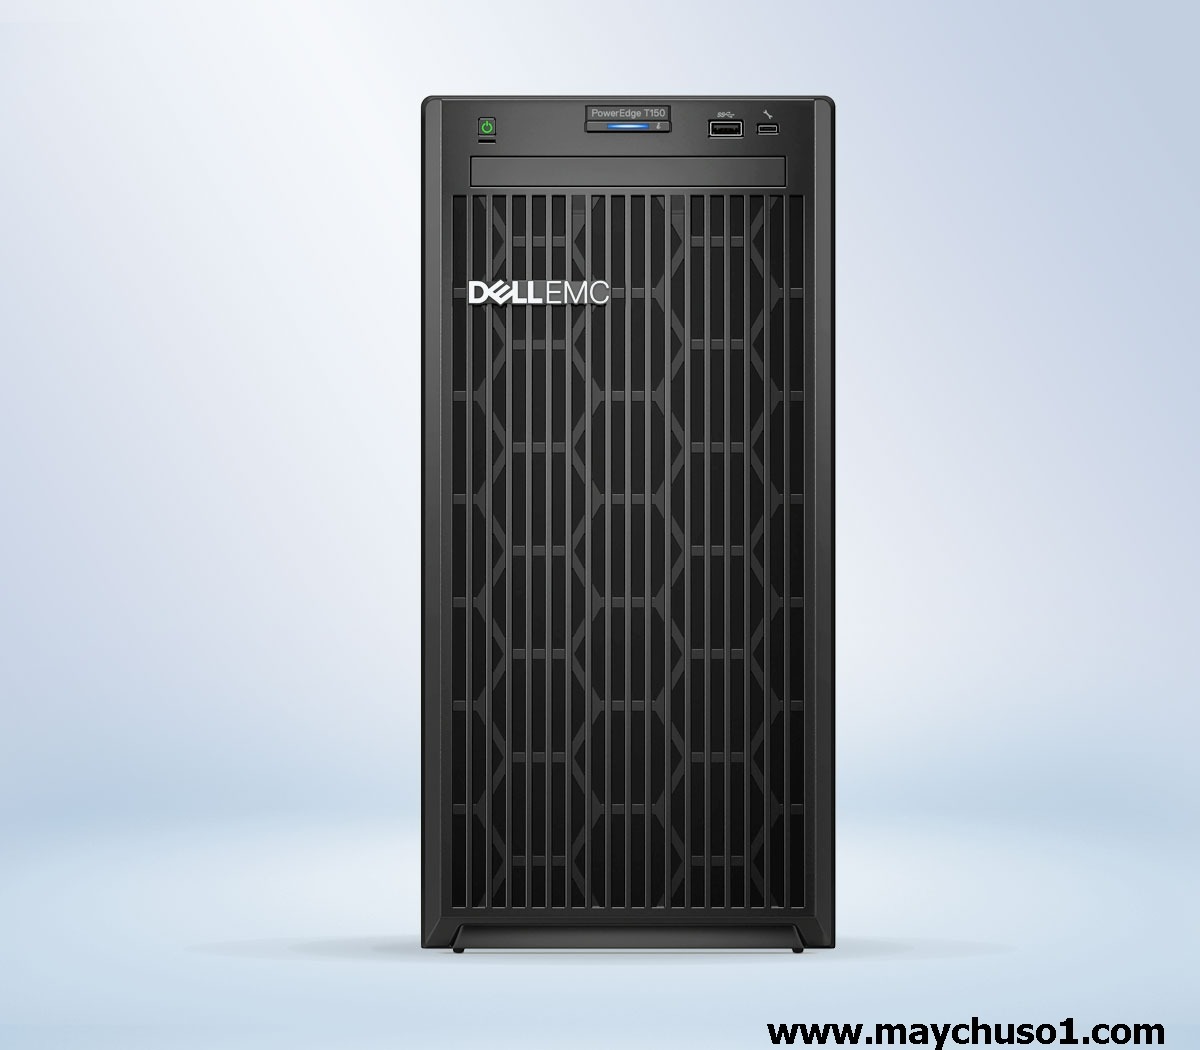 Máy ch? Dell T150 4x3.5 / E-2324G/ 8GB DDR4 UDIMM, 3200MT/ 2TB SATA 6Gbps 7.2K 512n 3.5in Cabled/ PERC H755/ iDRAC9 Express/ BC5720DP 1GbE LOM/ DVDRW/ Cabled PSU 300W/ No OS/ 4 Yrs Pro